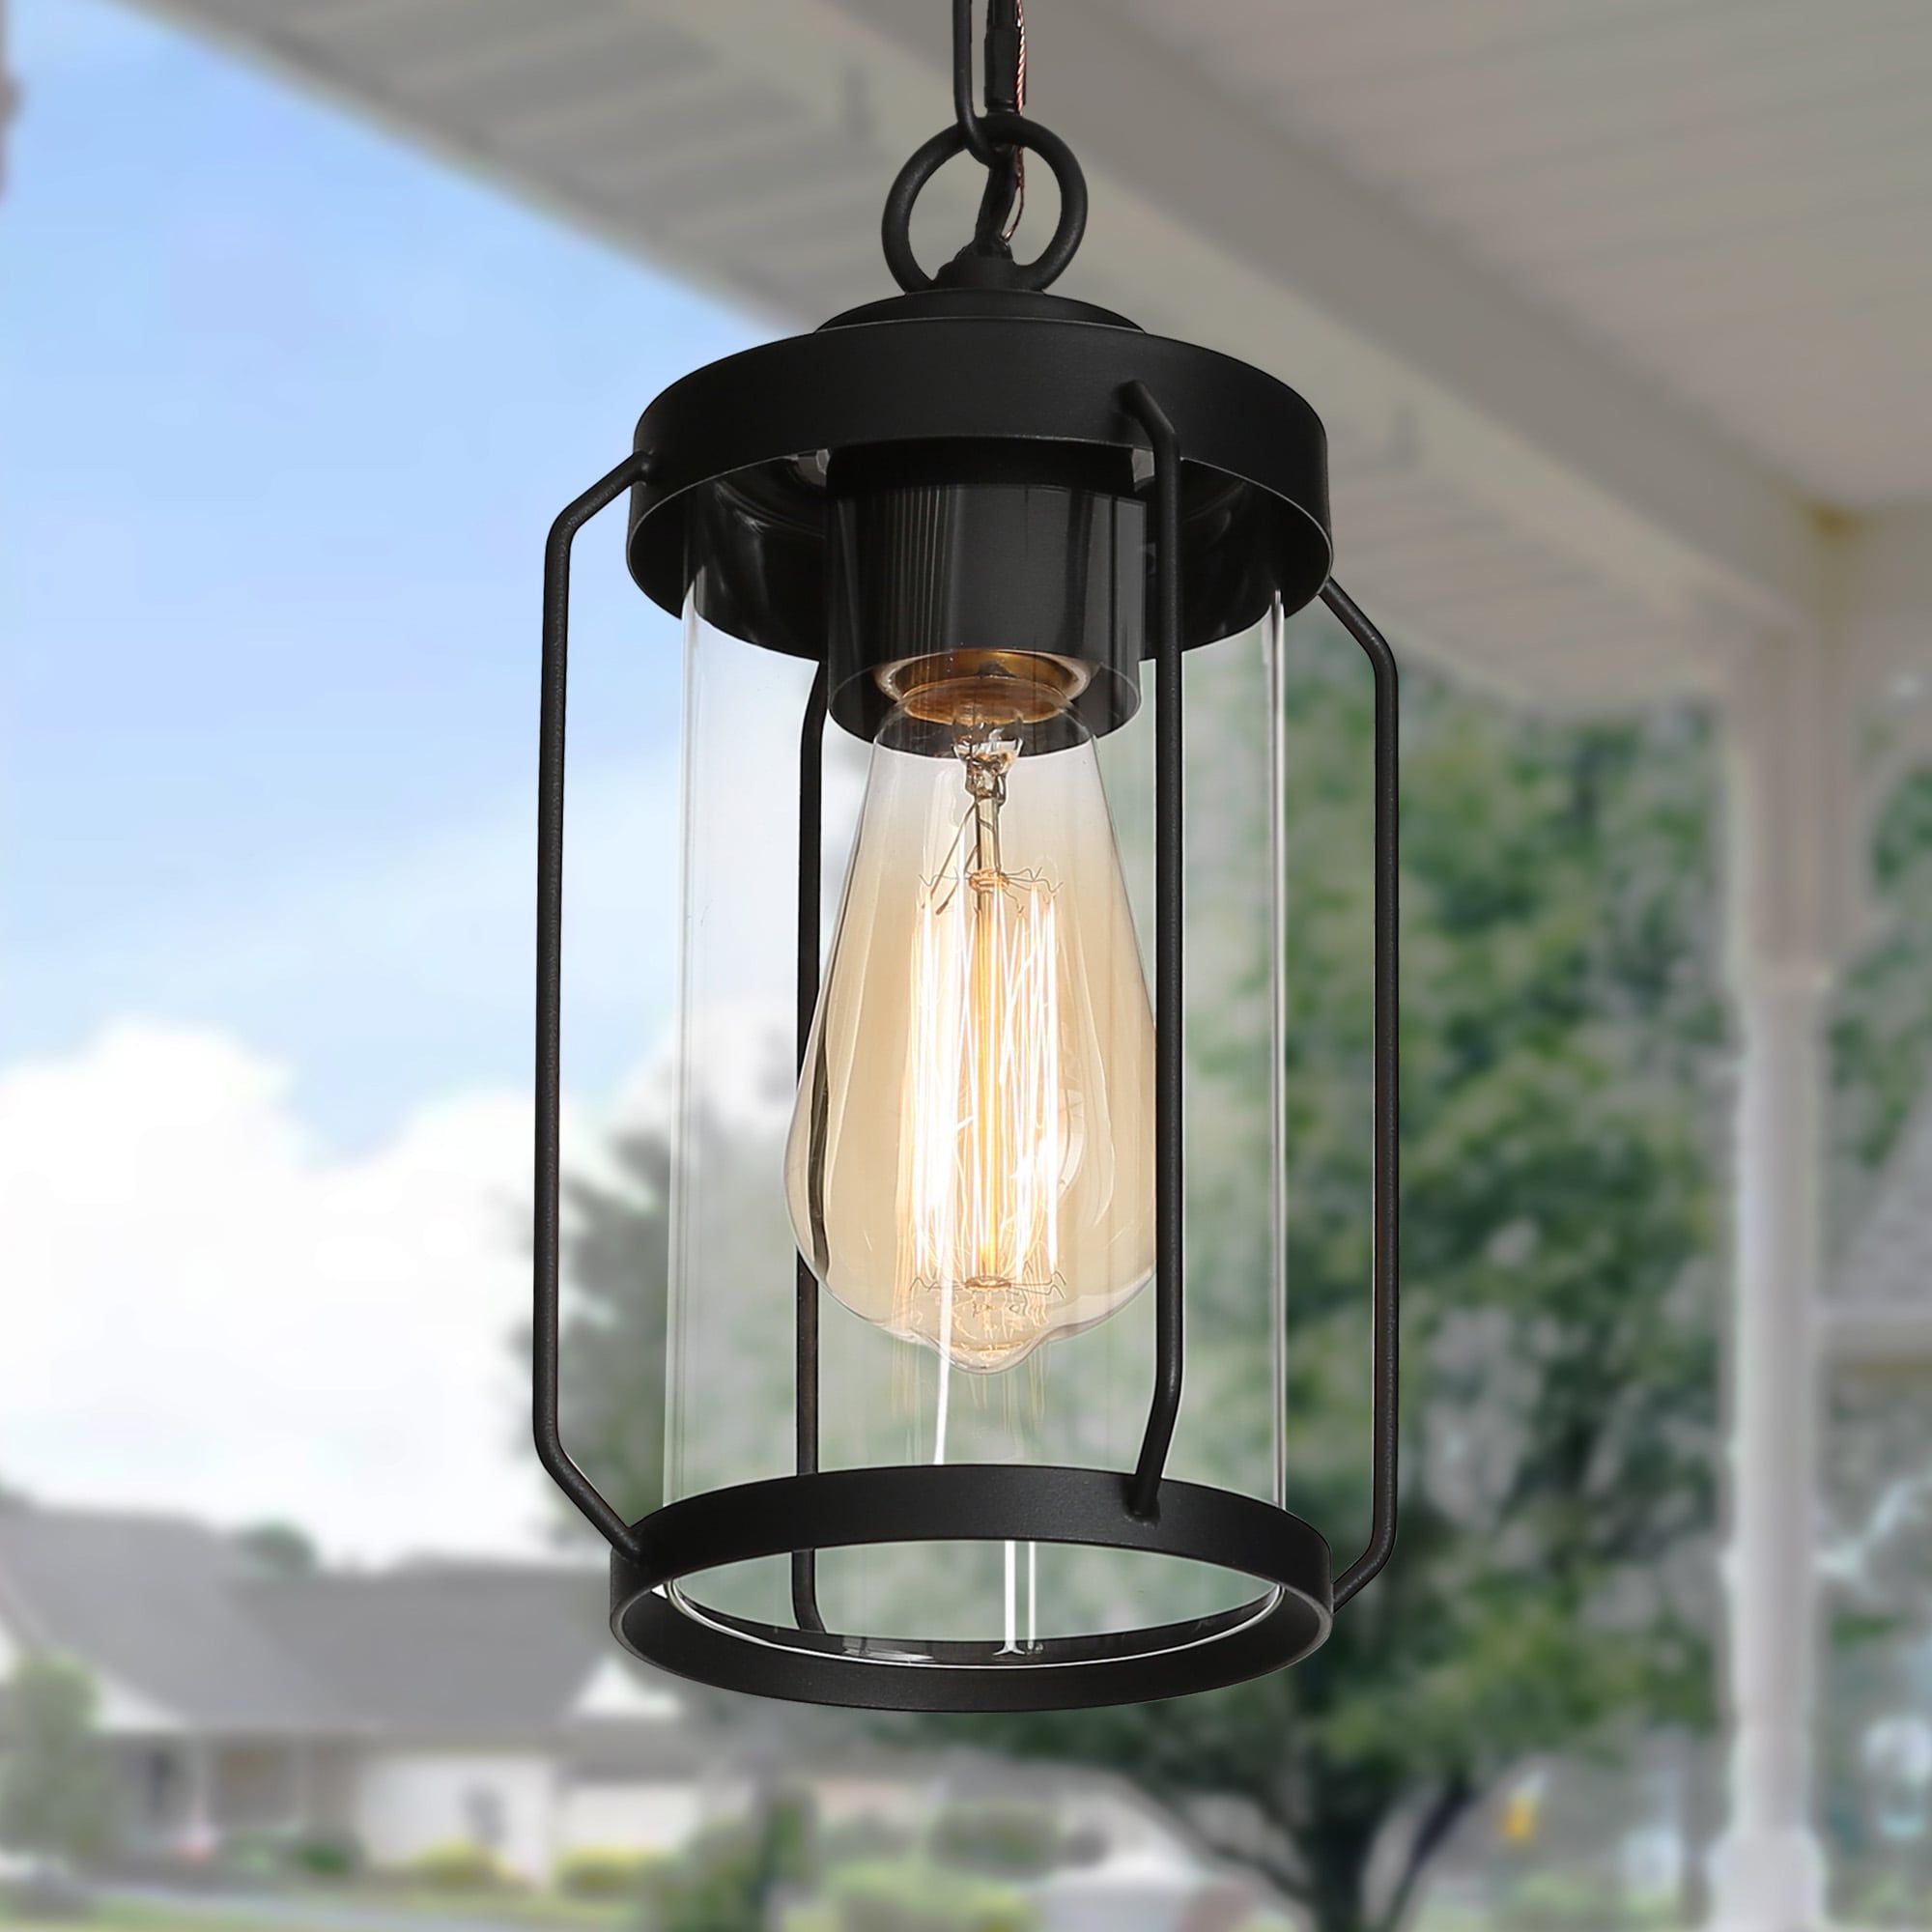 Textured Black Lantern Chandeliers Pertaining To Latest Uolfin Textured Black In Lantern Shape Modern/contemporary Clear Glass  Cylinder Mini Outdoor Pendant Light In The Pendant Lighting Department At  Lowes (View 4 of 10)